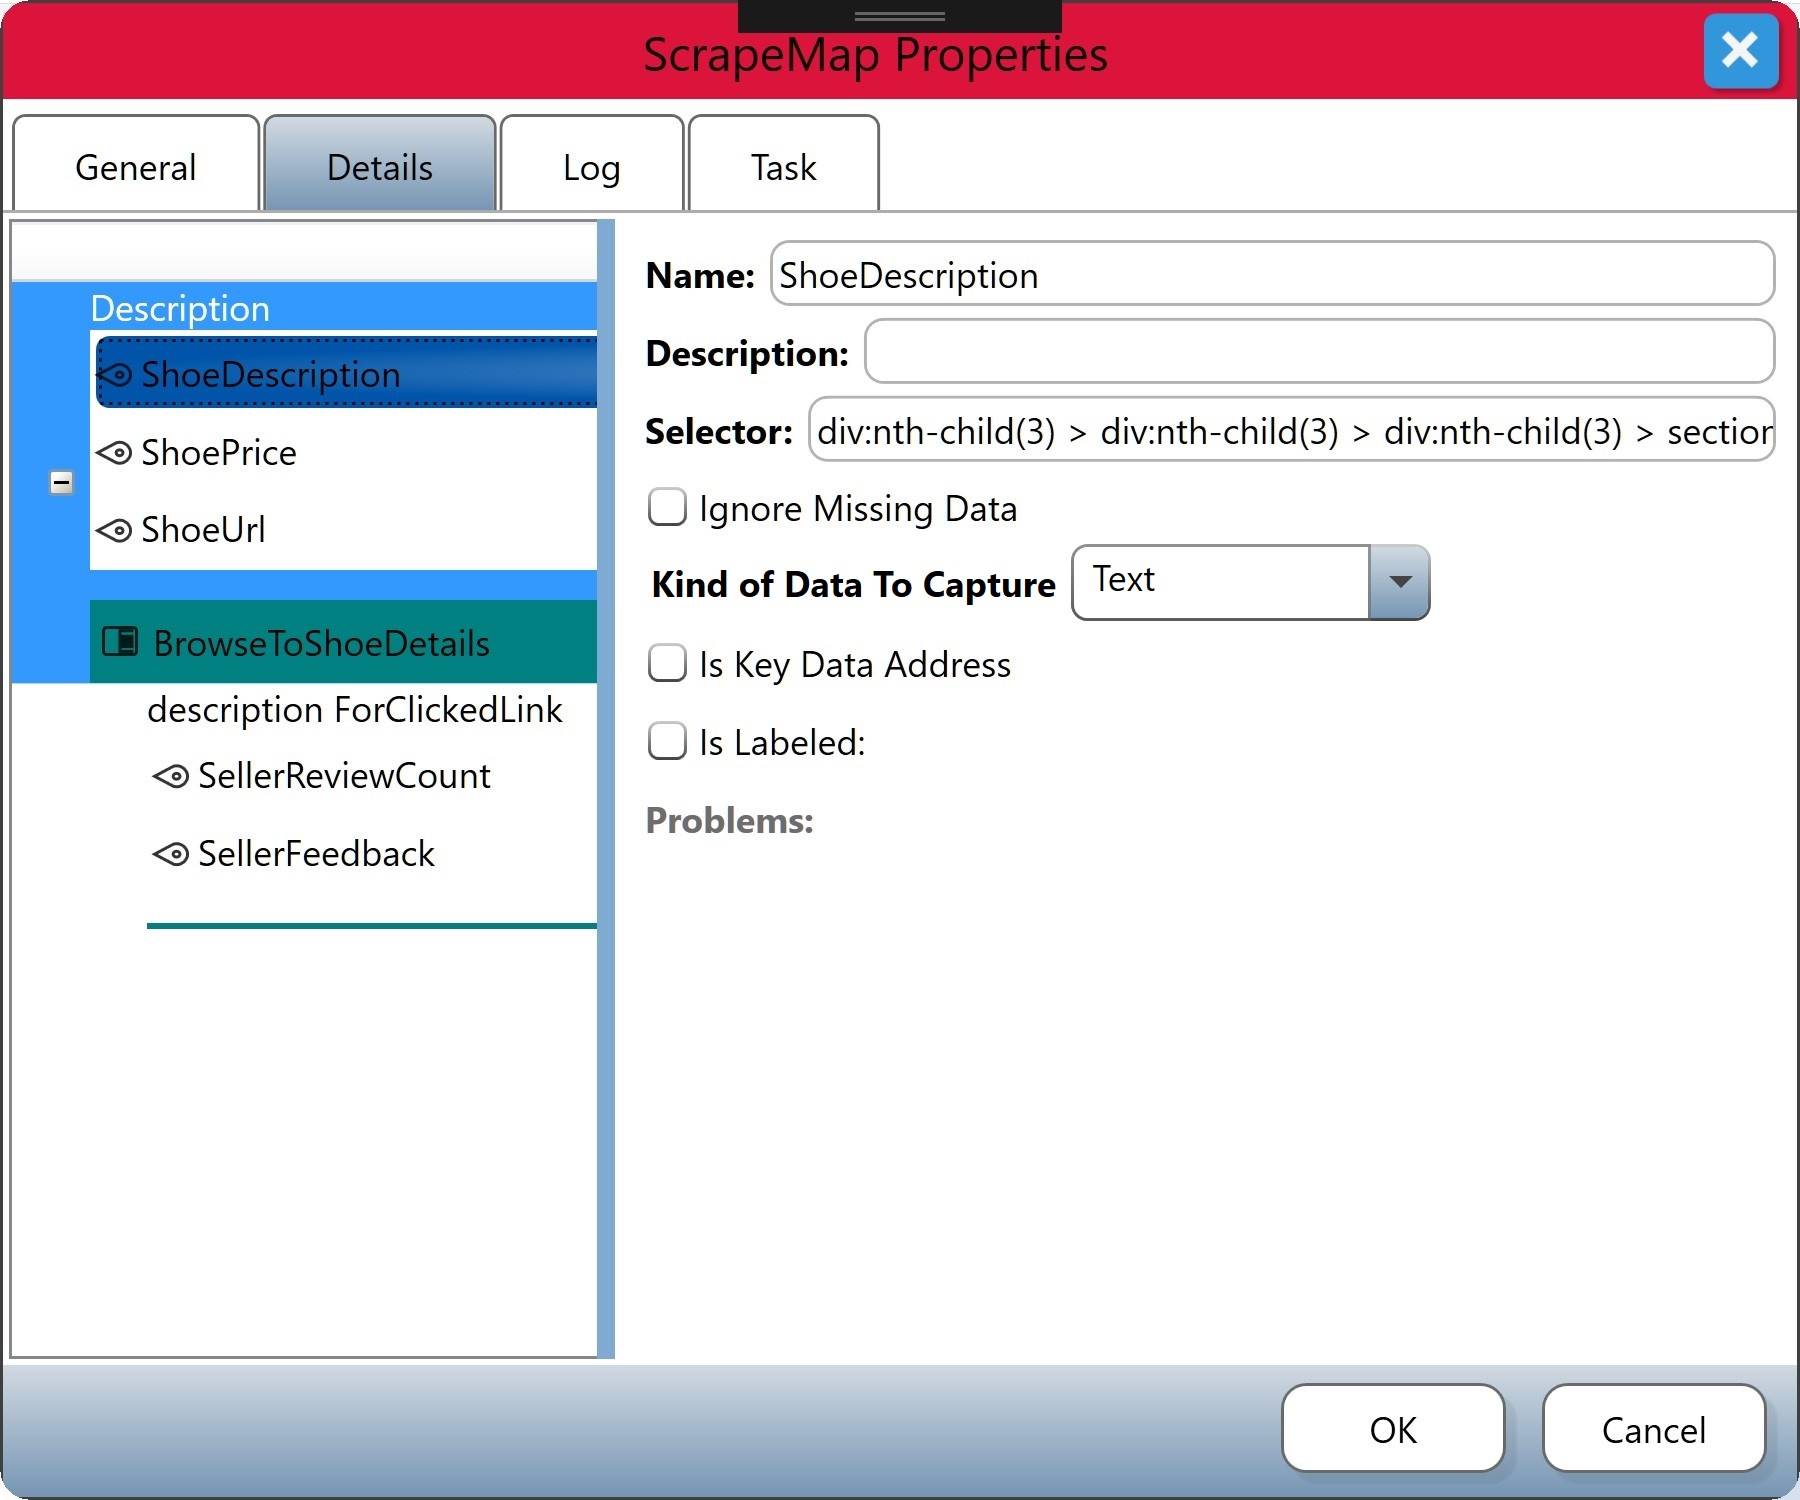 Details Tab of the ScrapeMap Properties Dialog with a DataAddress selected